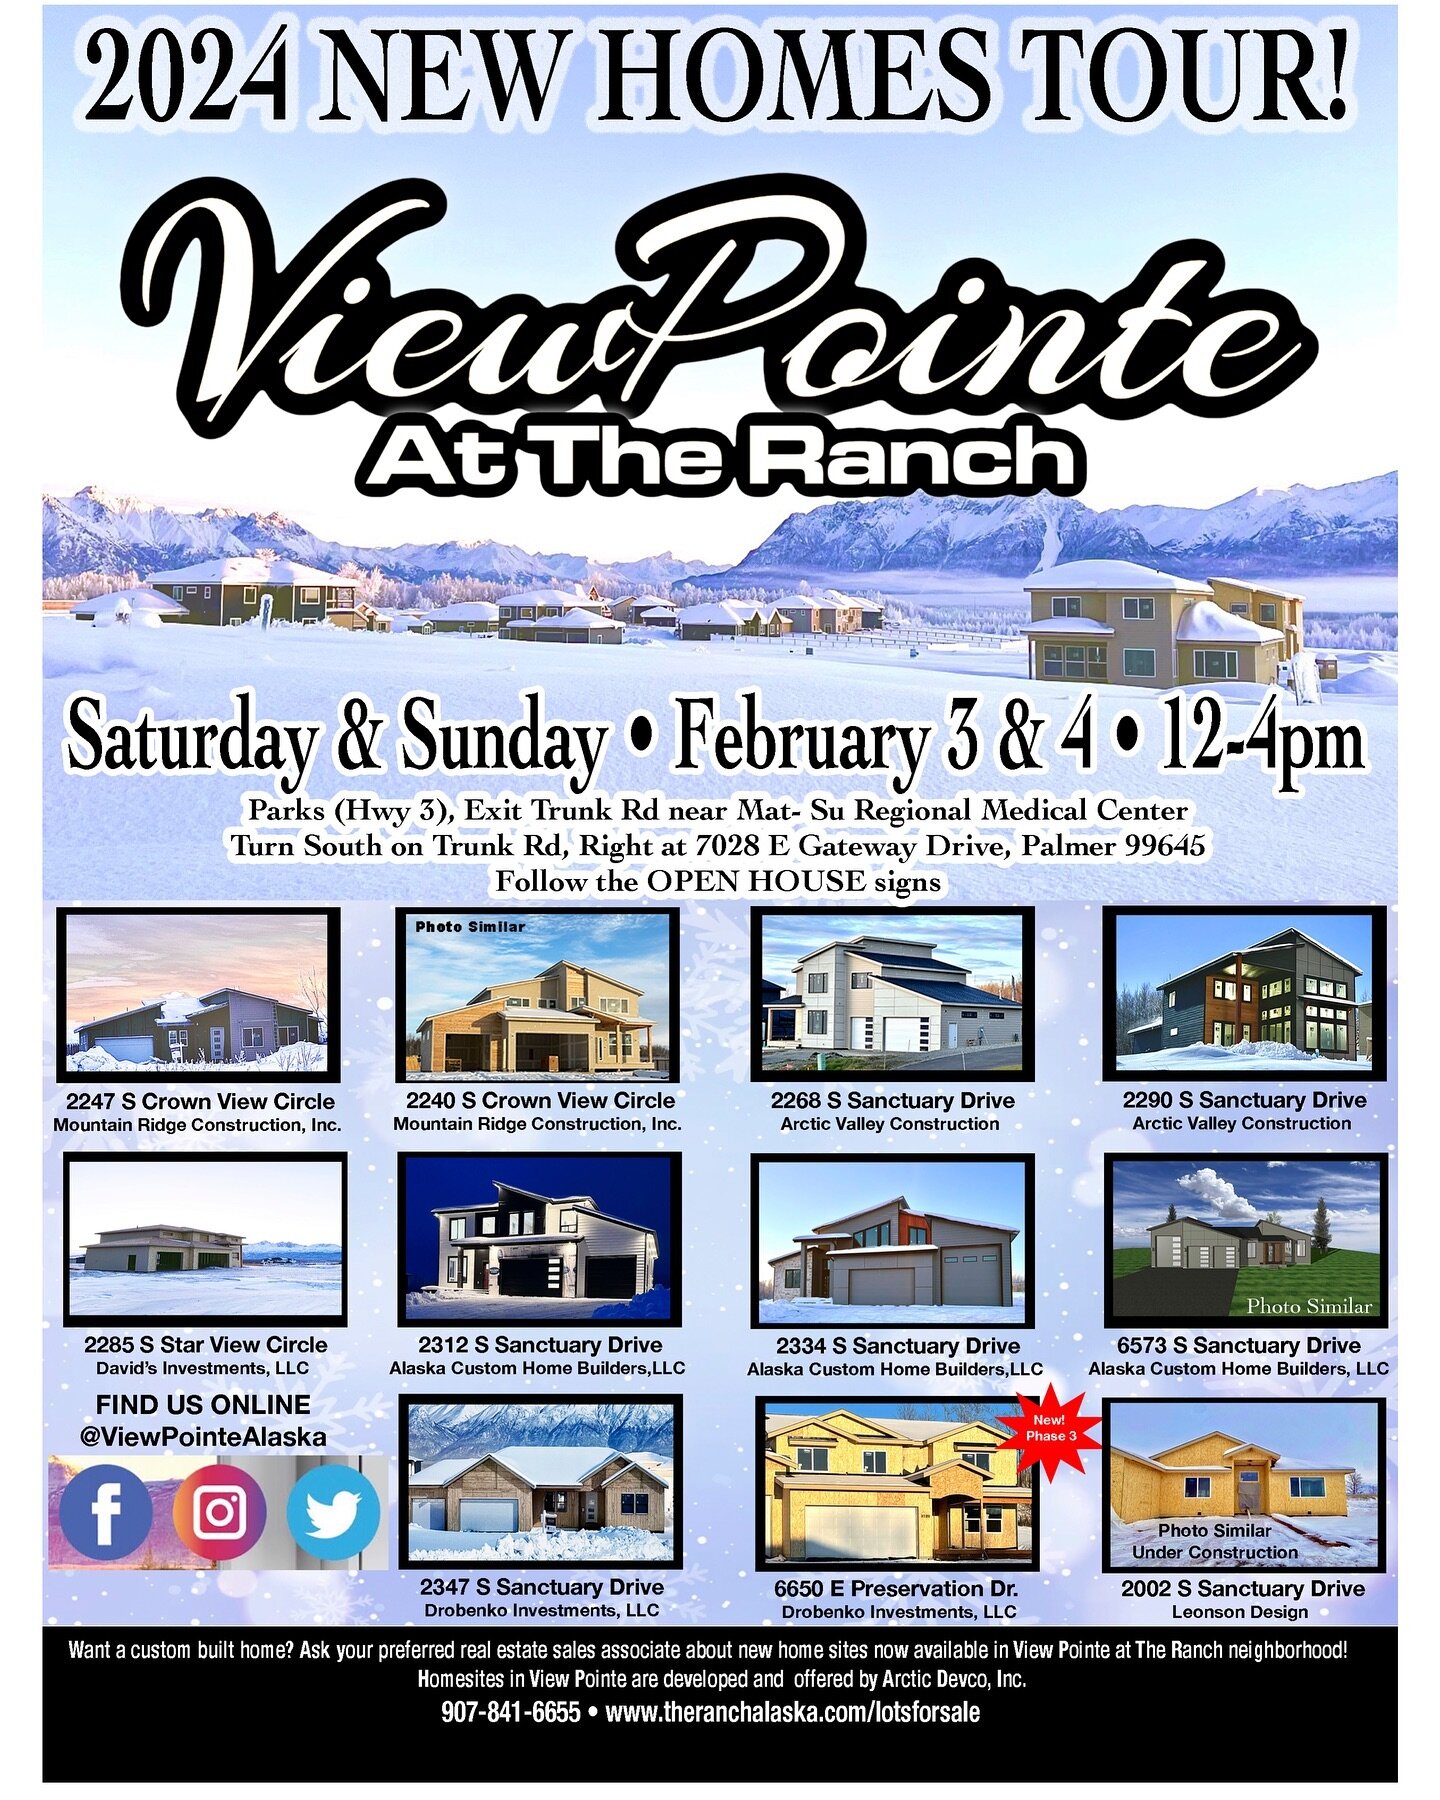 OPRN HOUSE, Last day Feb 4th from 12noon to 4pm to meet the Builders and Teams. It was a busy day yesterday and we invite you to come out and see what View Pointe is all about. 

7028 E Gateway Dr, Palmer Alaska 99645

#matsuhomebuilders #matsu #mats